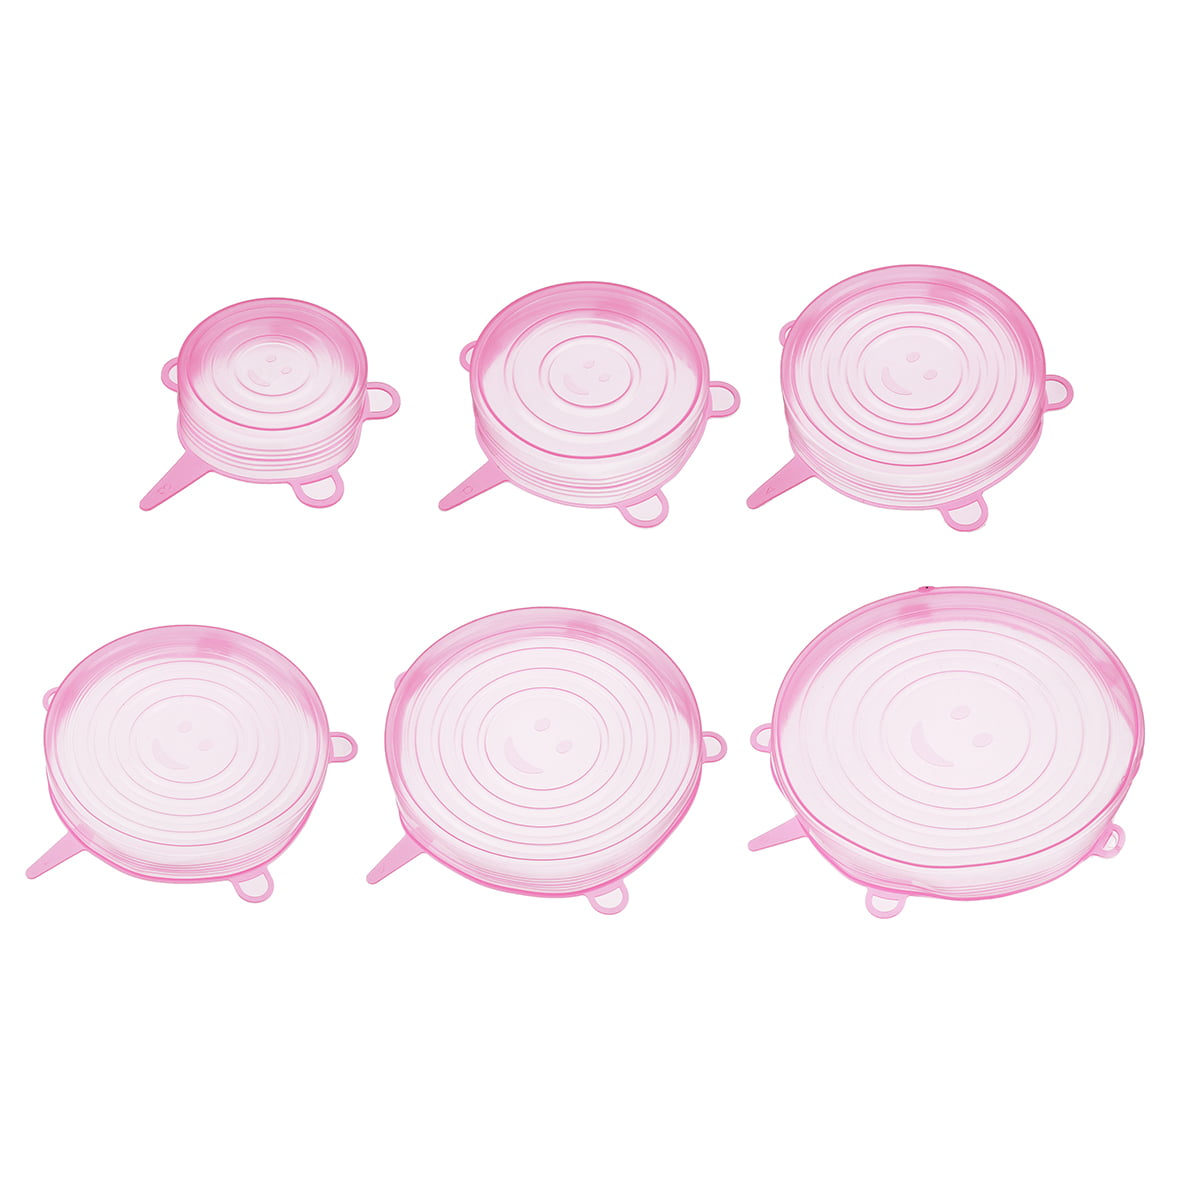 Details about   6Pcs/set Silicone Universal Covers Suction Cover Stretch Cooking Pot Lid Cap 